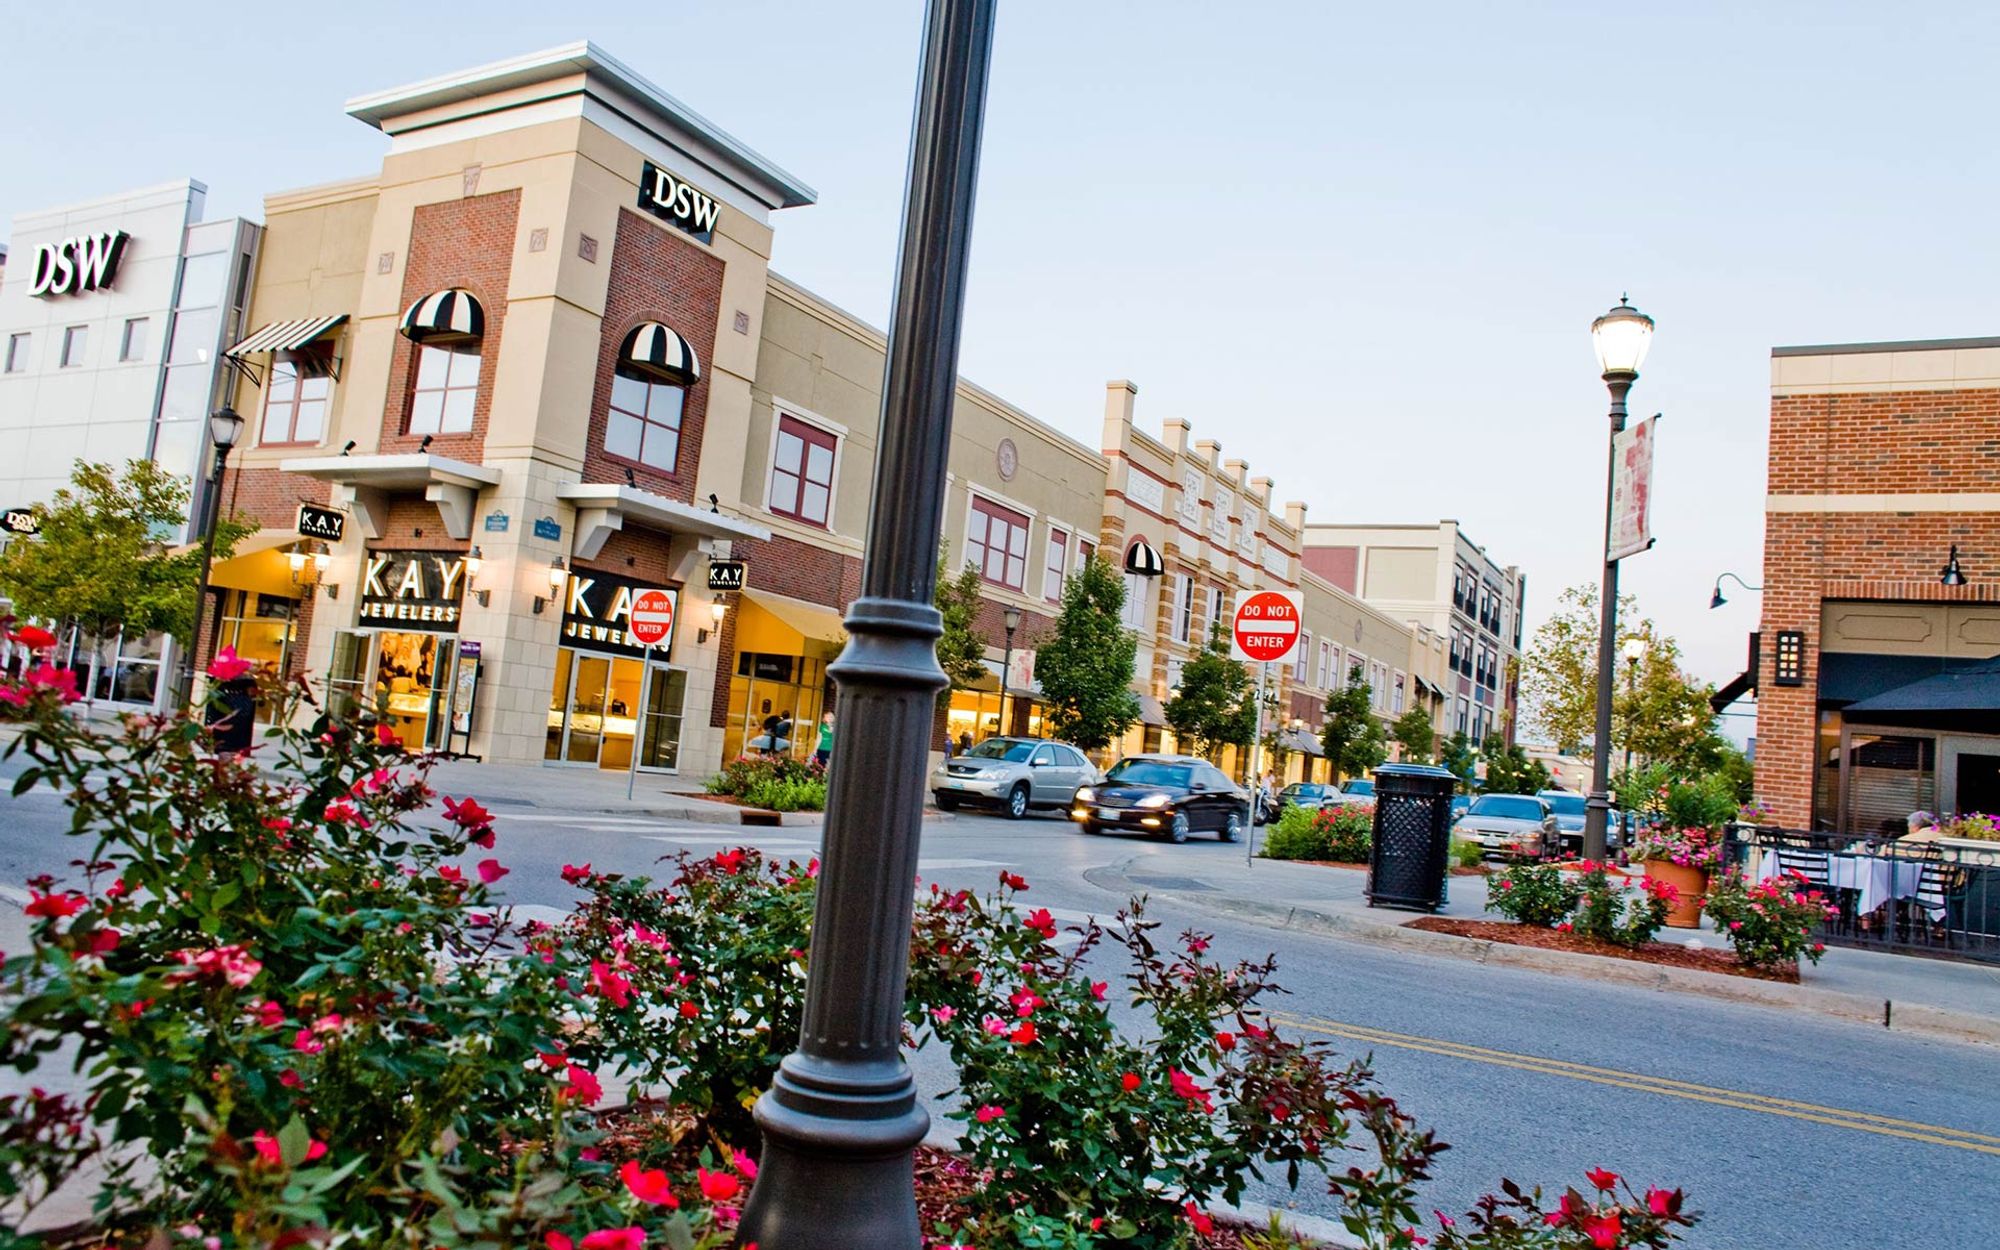 Zona Rosa shopping center close to The Reserve at Riverstone new home community in Park Hill school district